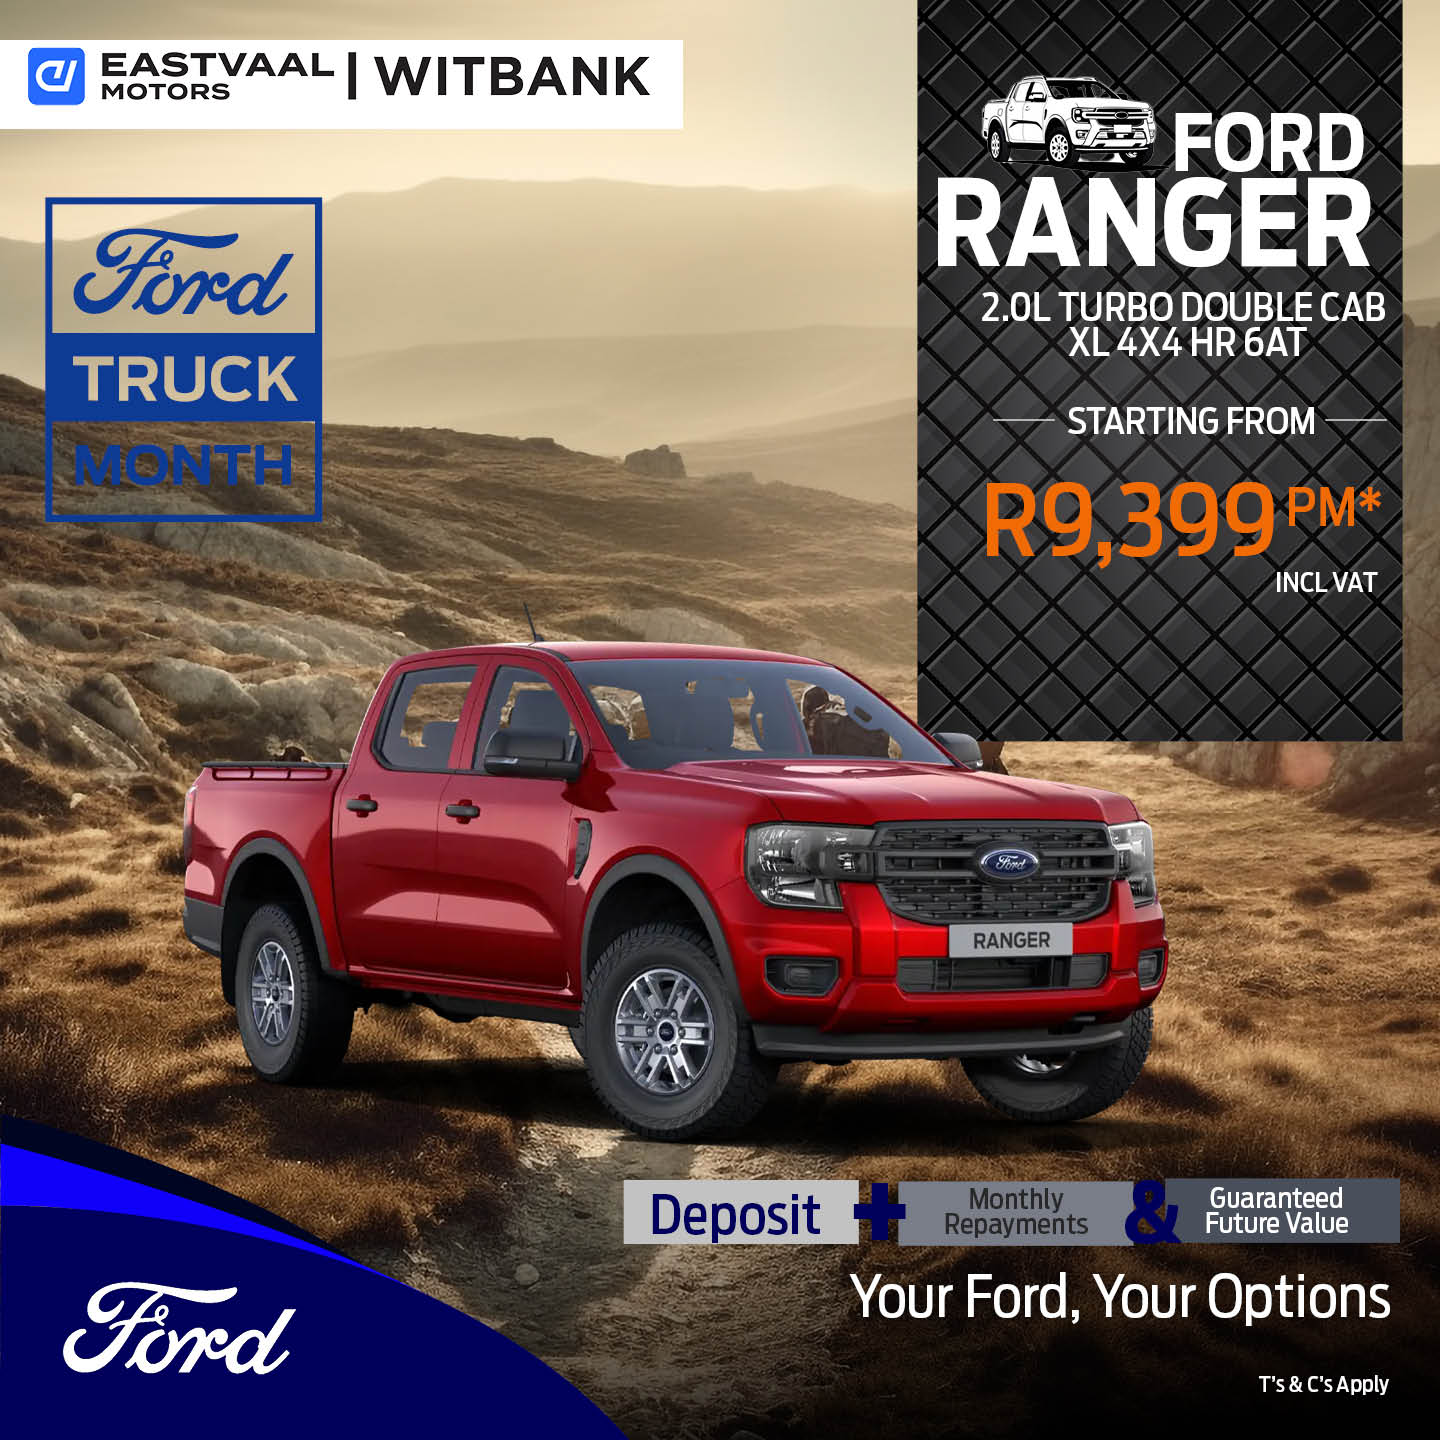 Truck month is here! Ford Ranger 2.0L Turbo D/C XL 4×4 HR 6AT image from 